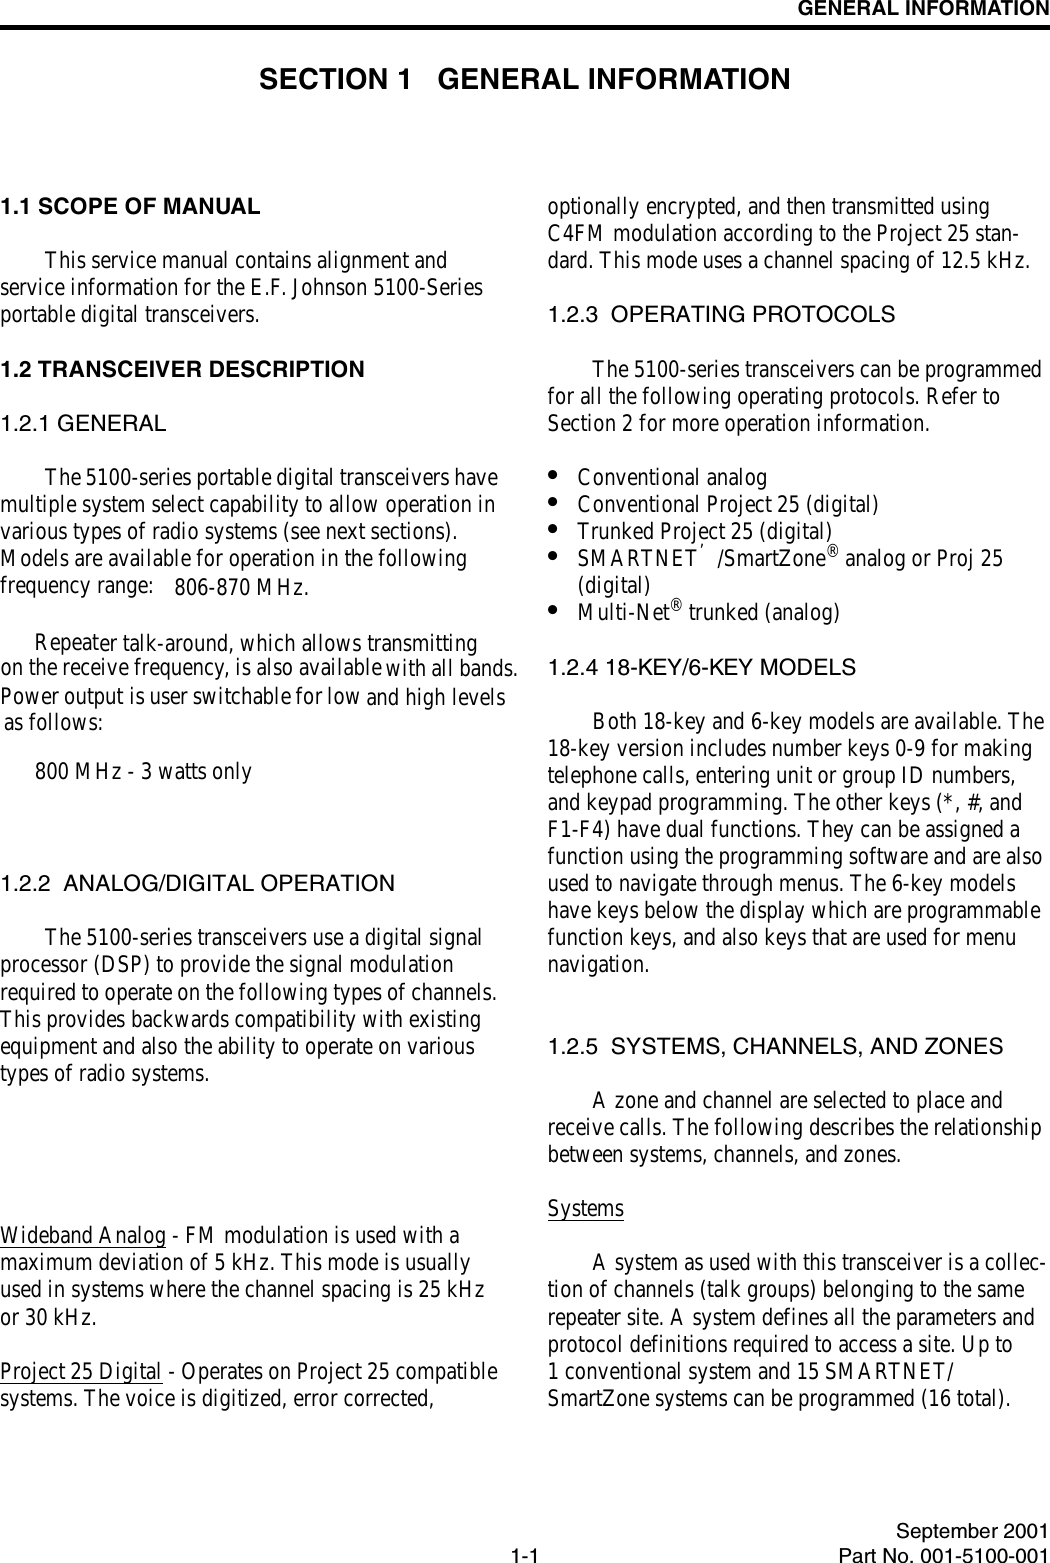 1-1September 2001Part No. 001-5100-001GENERAL INFORMATIONSECTION 1   GENERAL INFORMATION1.1 SCOPE OF MANUALThis service manual contains alignment and service information for the E.F. Johnson 5100-Series portable digital transceivers.1.2 TRANSCEIVER DESCRIPTION1.2.1 GENERALThe 5100-series portable digital transceivers have multiple system select capability to allow operation in various types of radio systems (see next sections). Models are available for operation in the following frequency range: 806-870 MHz. Repeater talk-around, which allows transmitting on the receive frequency, is also available  with all bands.  Power output is user switchable for low and high levels as follows: 800 MHz - 3 watts only1.2.2  ANALOG/DIGITAL OPERATIONThe 5100-series transceivers use a digital signal processor (DSP) to provide the signal modulation required to operate on the following types of channels. This provides backwards compatibility with existing equipment and also the ability to operate on various types of radio systems.Wideband Analog - FM modulation is used with a maximum deviation of 5 kHz. This mode is usually used in systems where the channel spacing is 25 kHz or 30 kHz. Project 25 Digital - Operates on Project 25 compatible systems. The voice is digitized, error corrected, optionally encrypted, and then transmitted using C4FM modulation according to the Project 25 stan-dard. This mode uses a channel spacing of 12.5 kHz.1.2.3  OPERATING PROTOCOLSThe 5100-series transceivers can be programmed for all the following operating protocols. Refer to Section 2 for more operation information.•Conventional analog•Conventional Project 25 (digital)•Trunked Project 25 (digital)•SMARTNET’/SmartZone® analog or Proj 25 (digital)•Multi-Net® trunked (analog)1.2.4 18-KEY/6-KEY MODELSBoth 18-key and 6-key models are available. The 18-key version includes number keys 0-9 for making telephone calls, entering unit or group ID numbers, and keypad programming. The other keys (*, #, and F1-F4) have dual functions. They can be assigned a function using the programming software and are also used to navigate through menus. The 6-key models have keys below the display which are programmable function keys, and also keys that are used for menu navigation.1.2.5  SYSTEMS, CHANNELS, AND ZONESA zone and channel are selected to place and receive calls. The following describes the relationship between systems, channels, and zones.SystemsA system as used with this transceiver is a collec-tion of channels (talk groups) belonging to the same repeater site. A system defines all the parameters and protocol definitions required to access a site. Up to 1 conventional system and 15 SMARTNET/SmartZone systems can be programmed (16 total). 